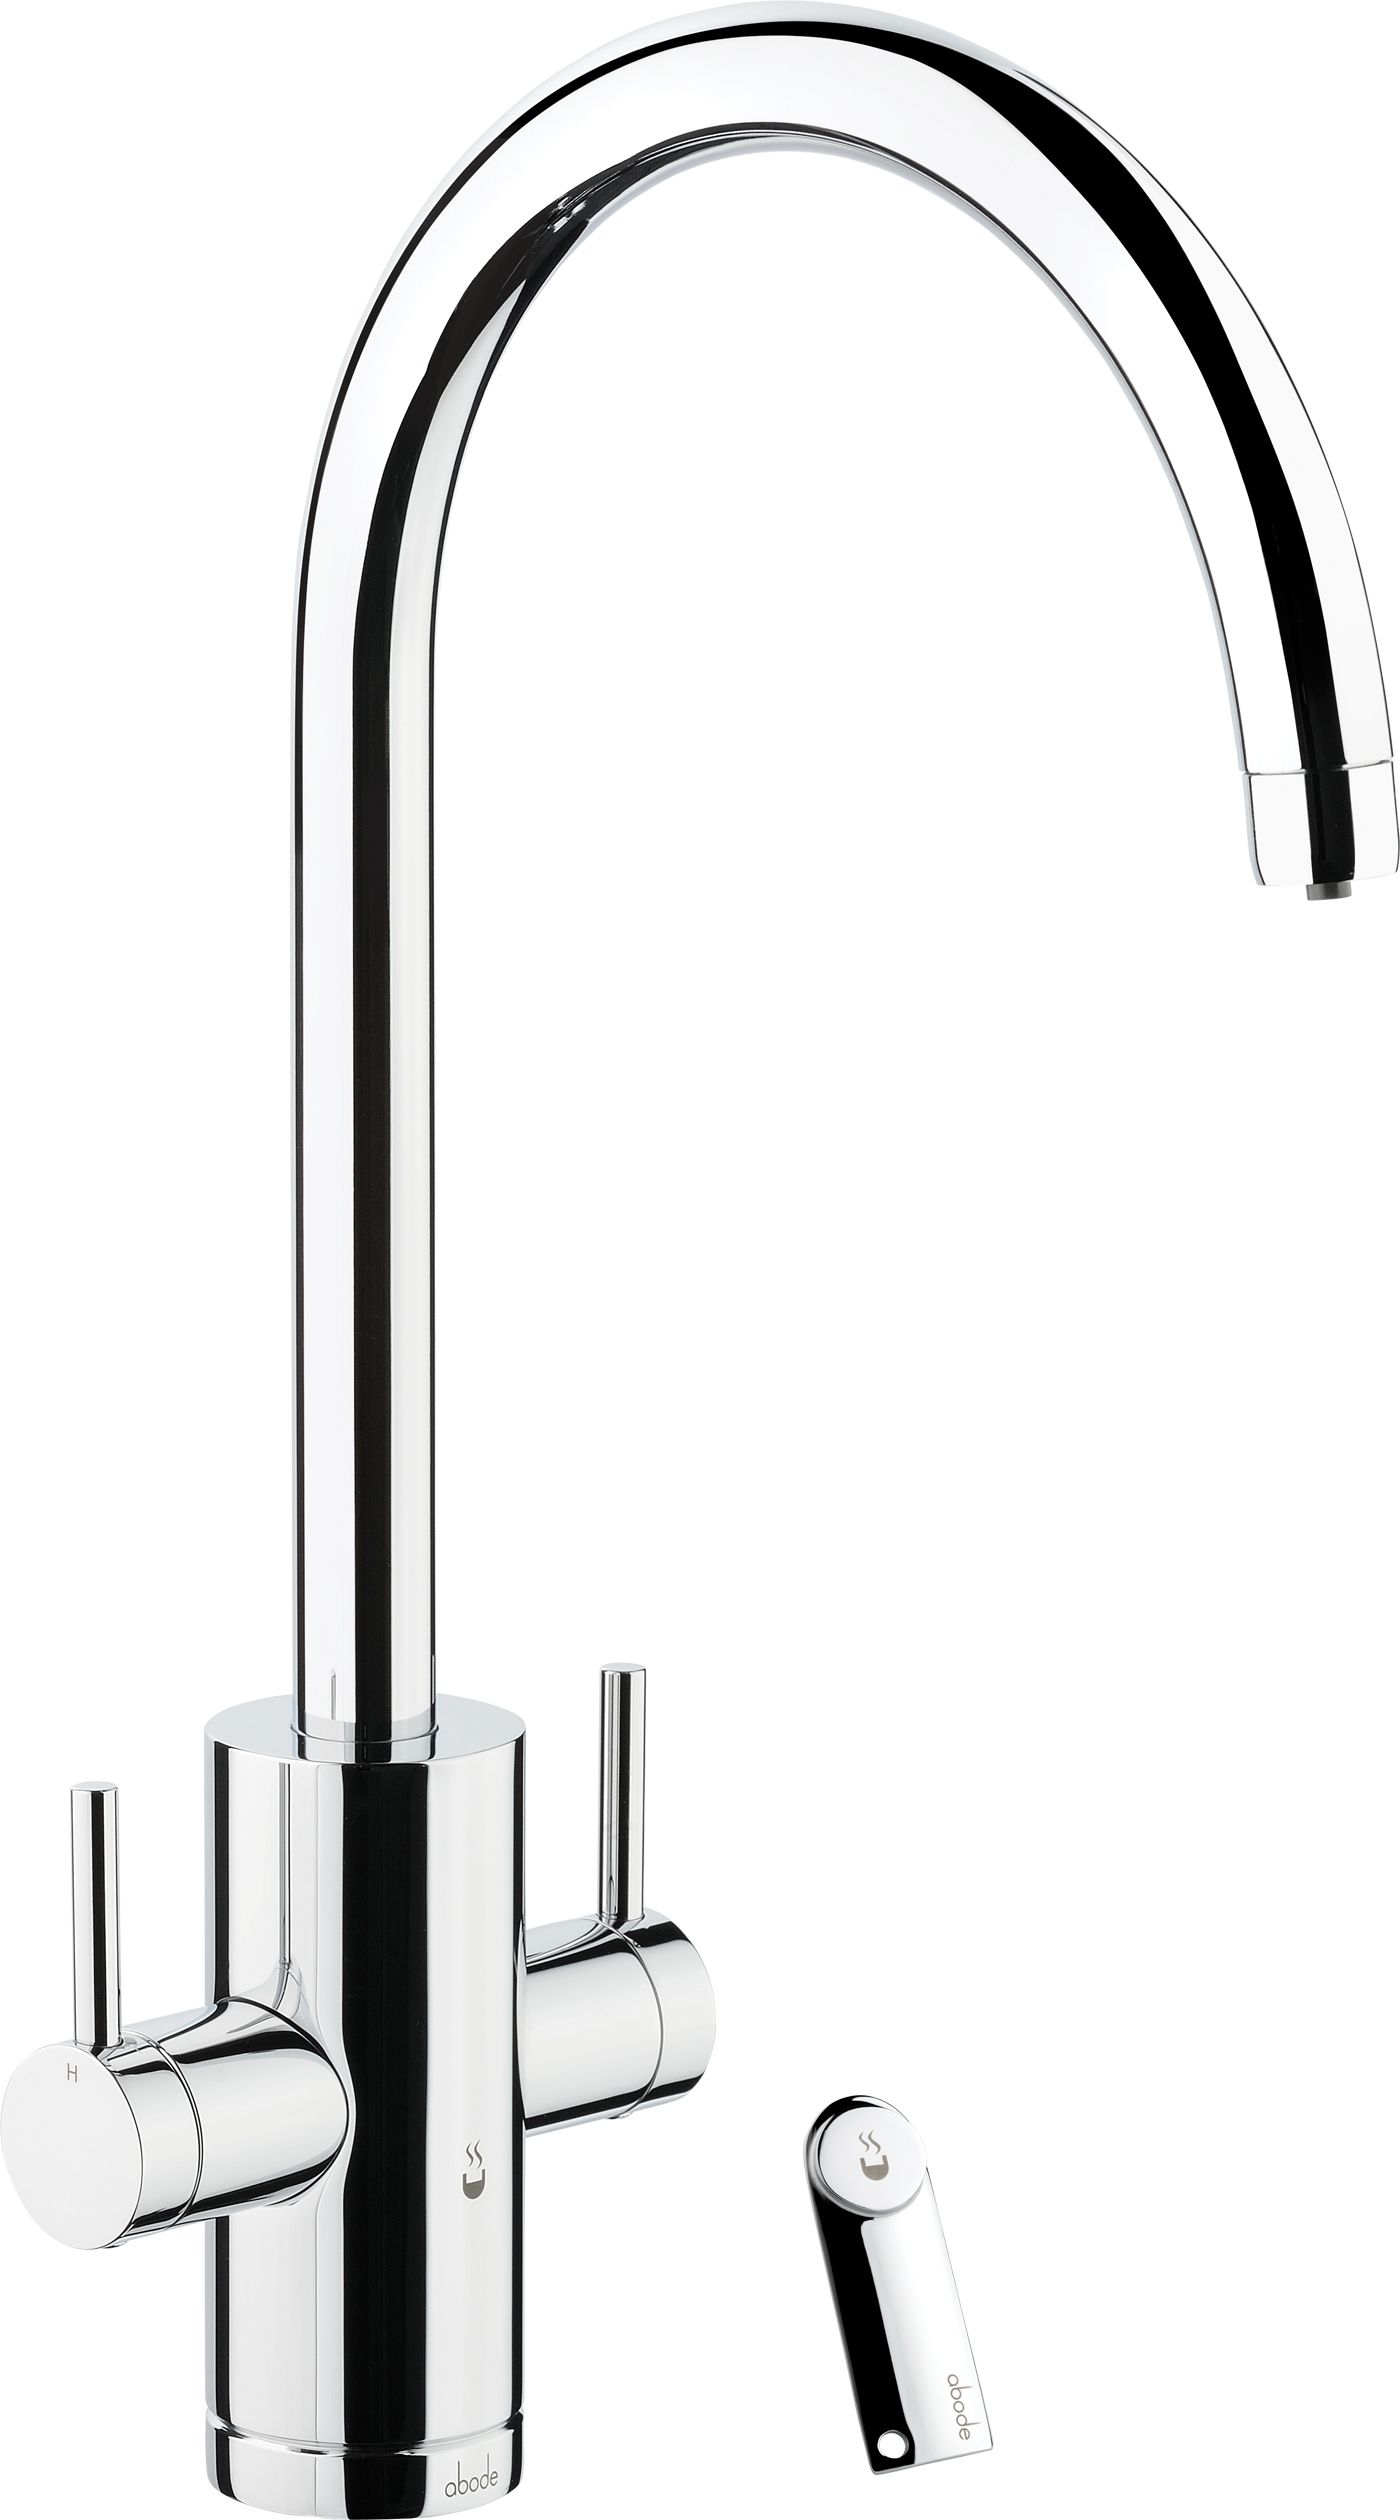 Abode Profile Monobloc 4 In 1 Hot Water Kitchen Tap with Boiler - Chrome